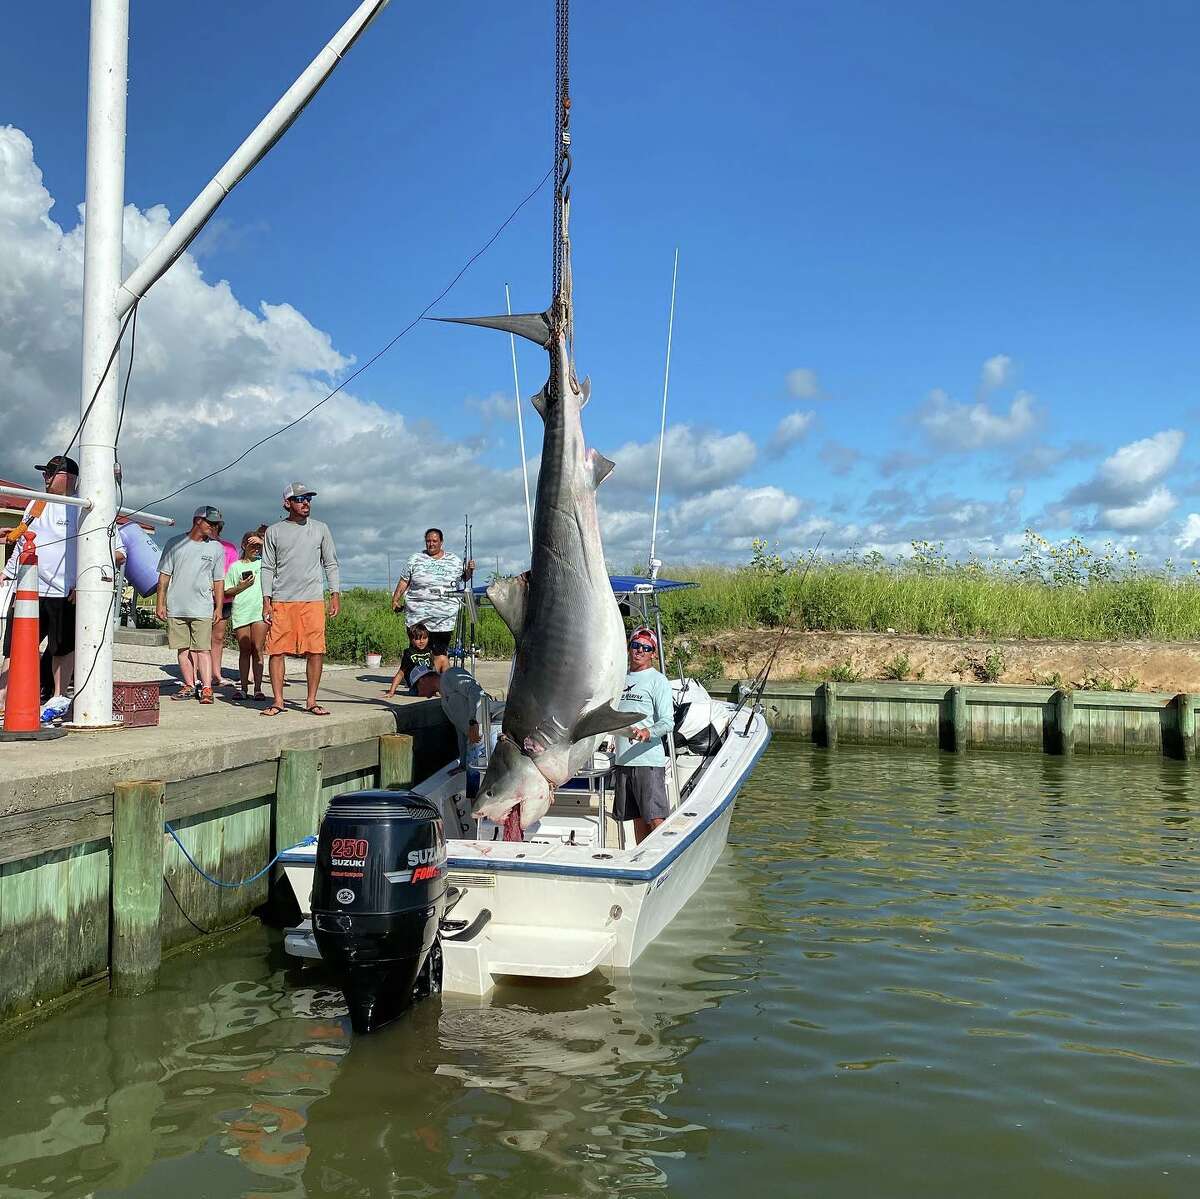 On July 1, Avery Fuller and his two brothers Clint and Tyler were out fishing about 40 miles off the coast of Galveston when he caught a 1,000-pound, 12-foot tiger shark. 